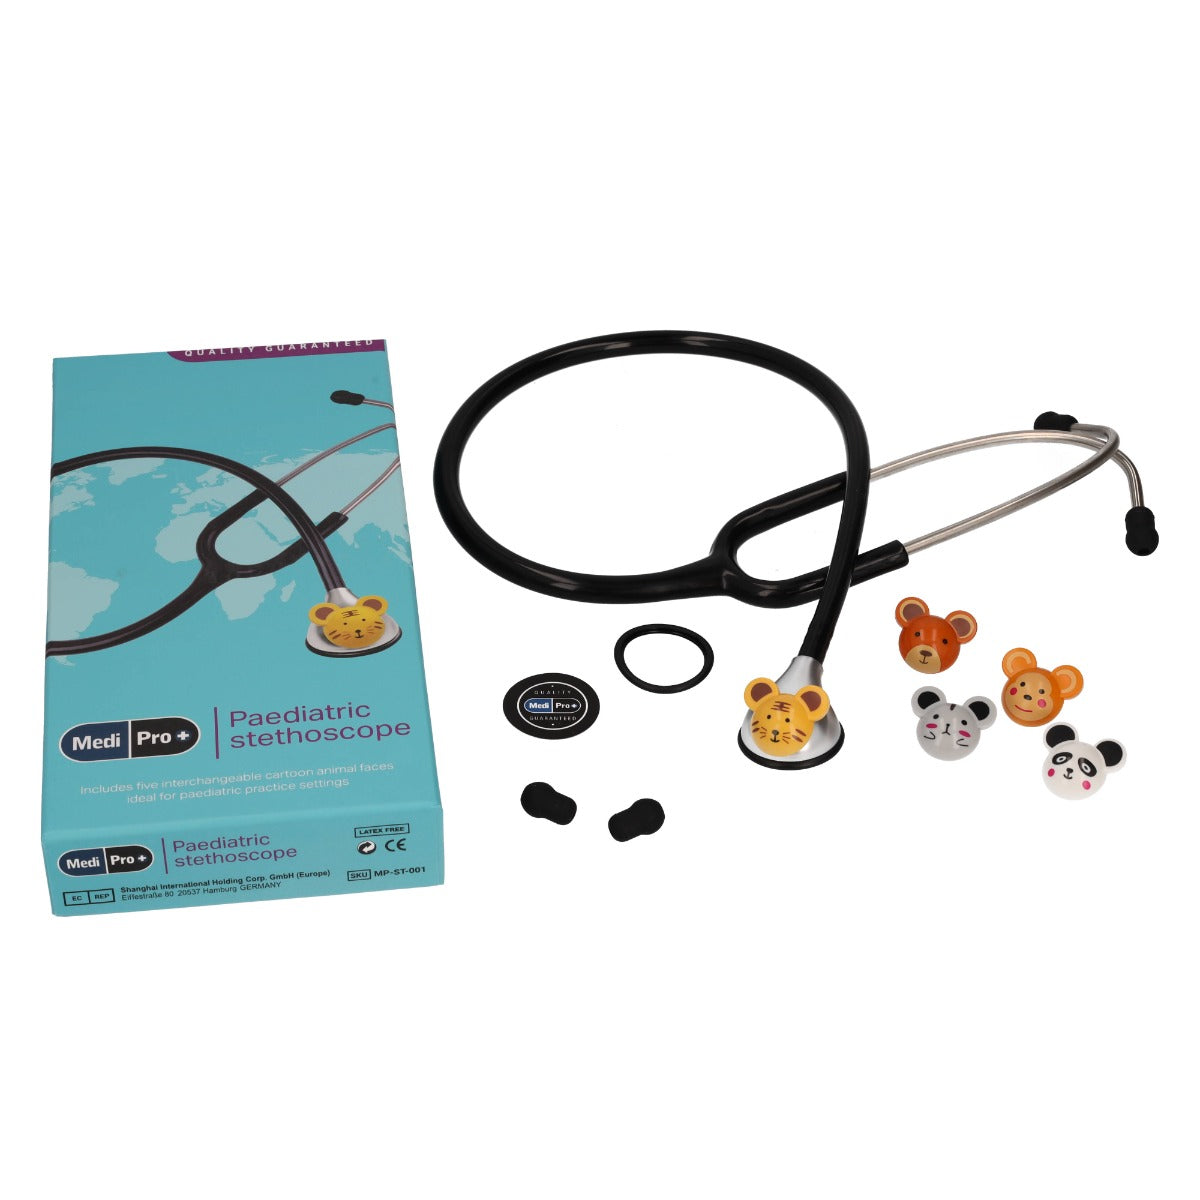 Cadet Blue Paediatric Stethoscope With Clip-on Animal Faces